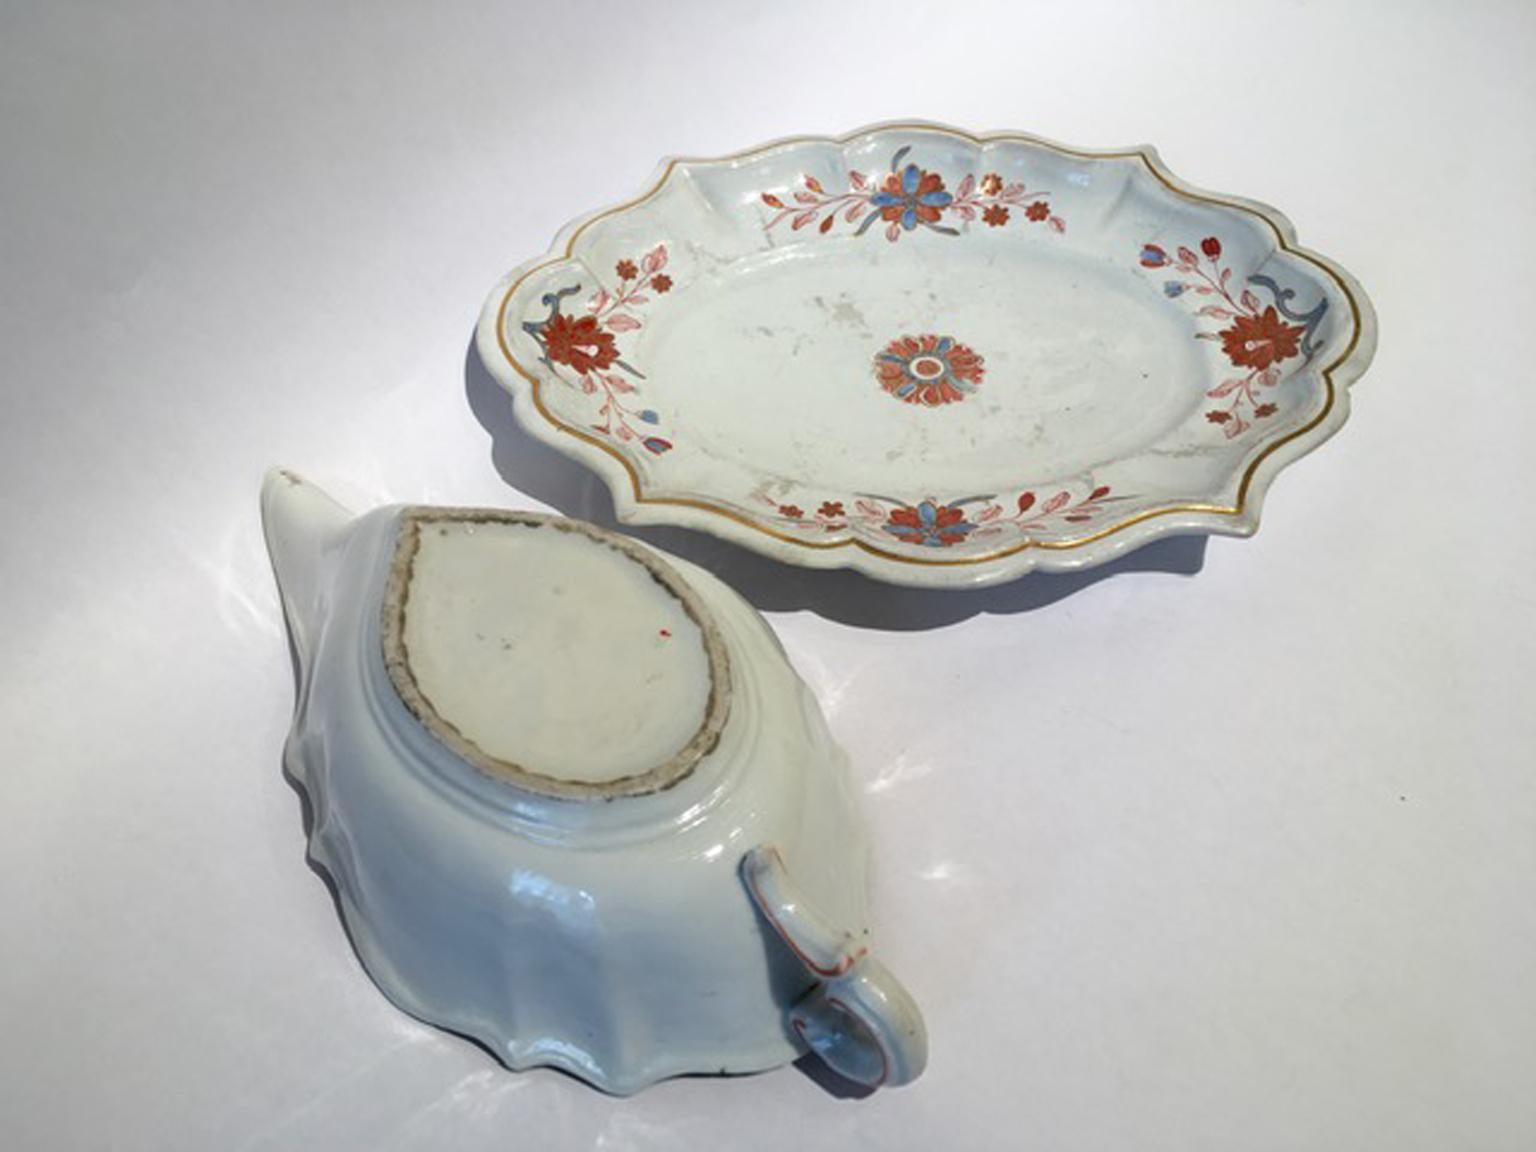 Italy Richard Ginori 18th Century Porcelain Sauce Terrin Floral Drawings For Sale 14